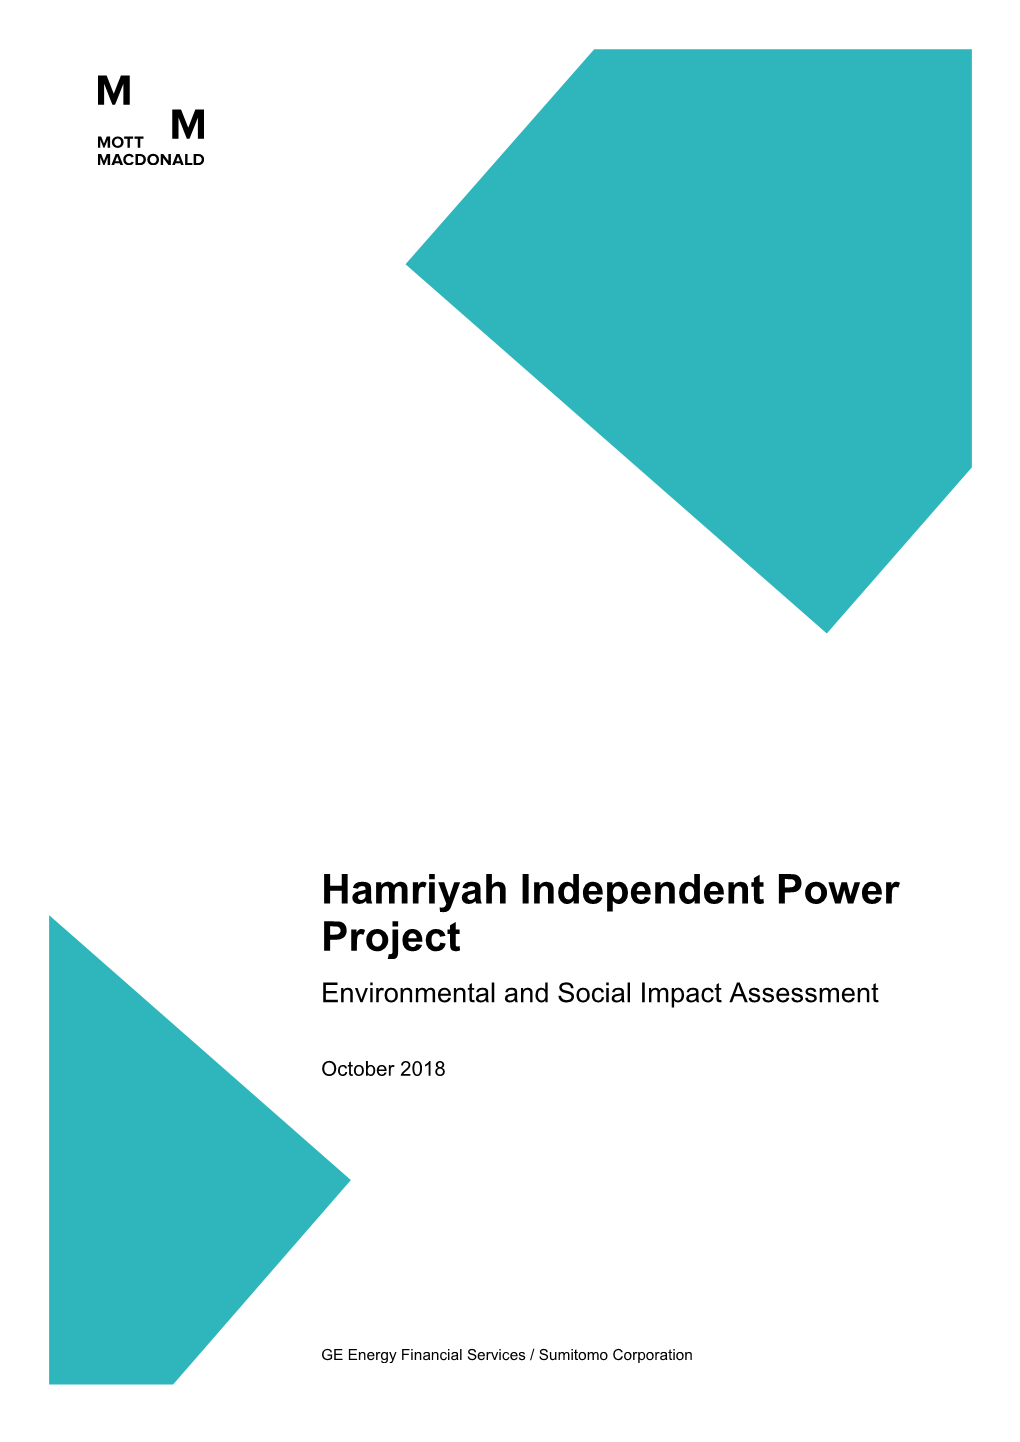 Hamriyah Independent Power Project Environmental and Social Impact Assessment